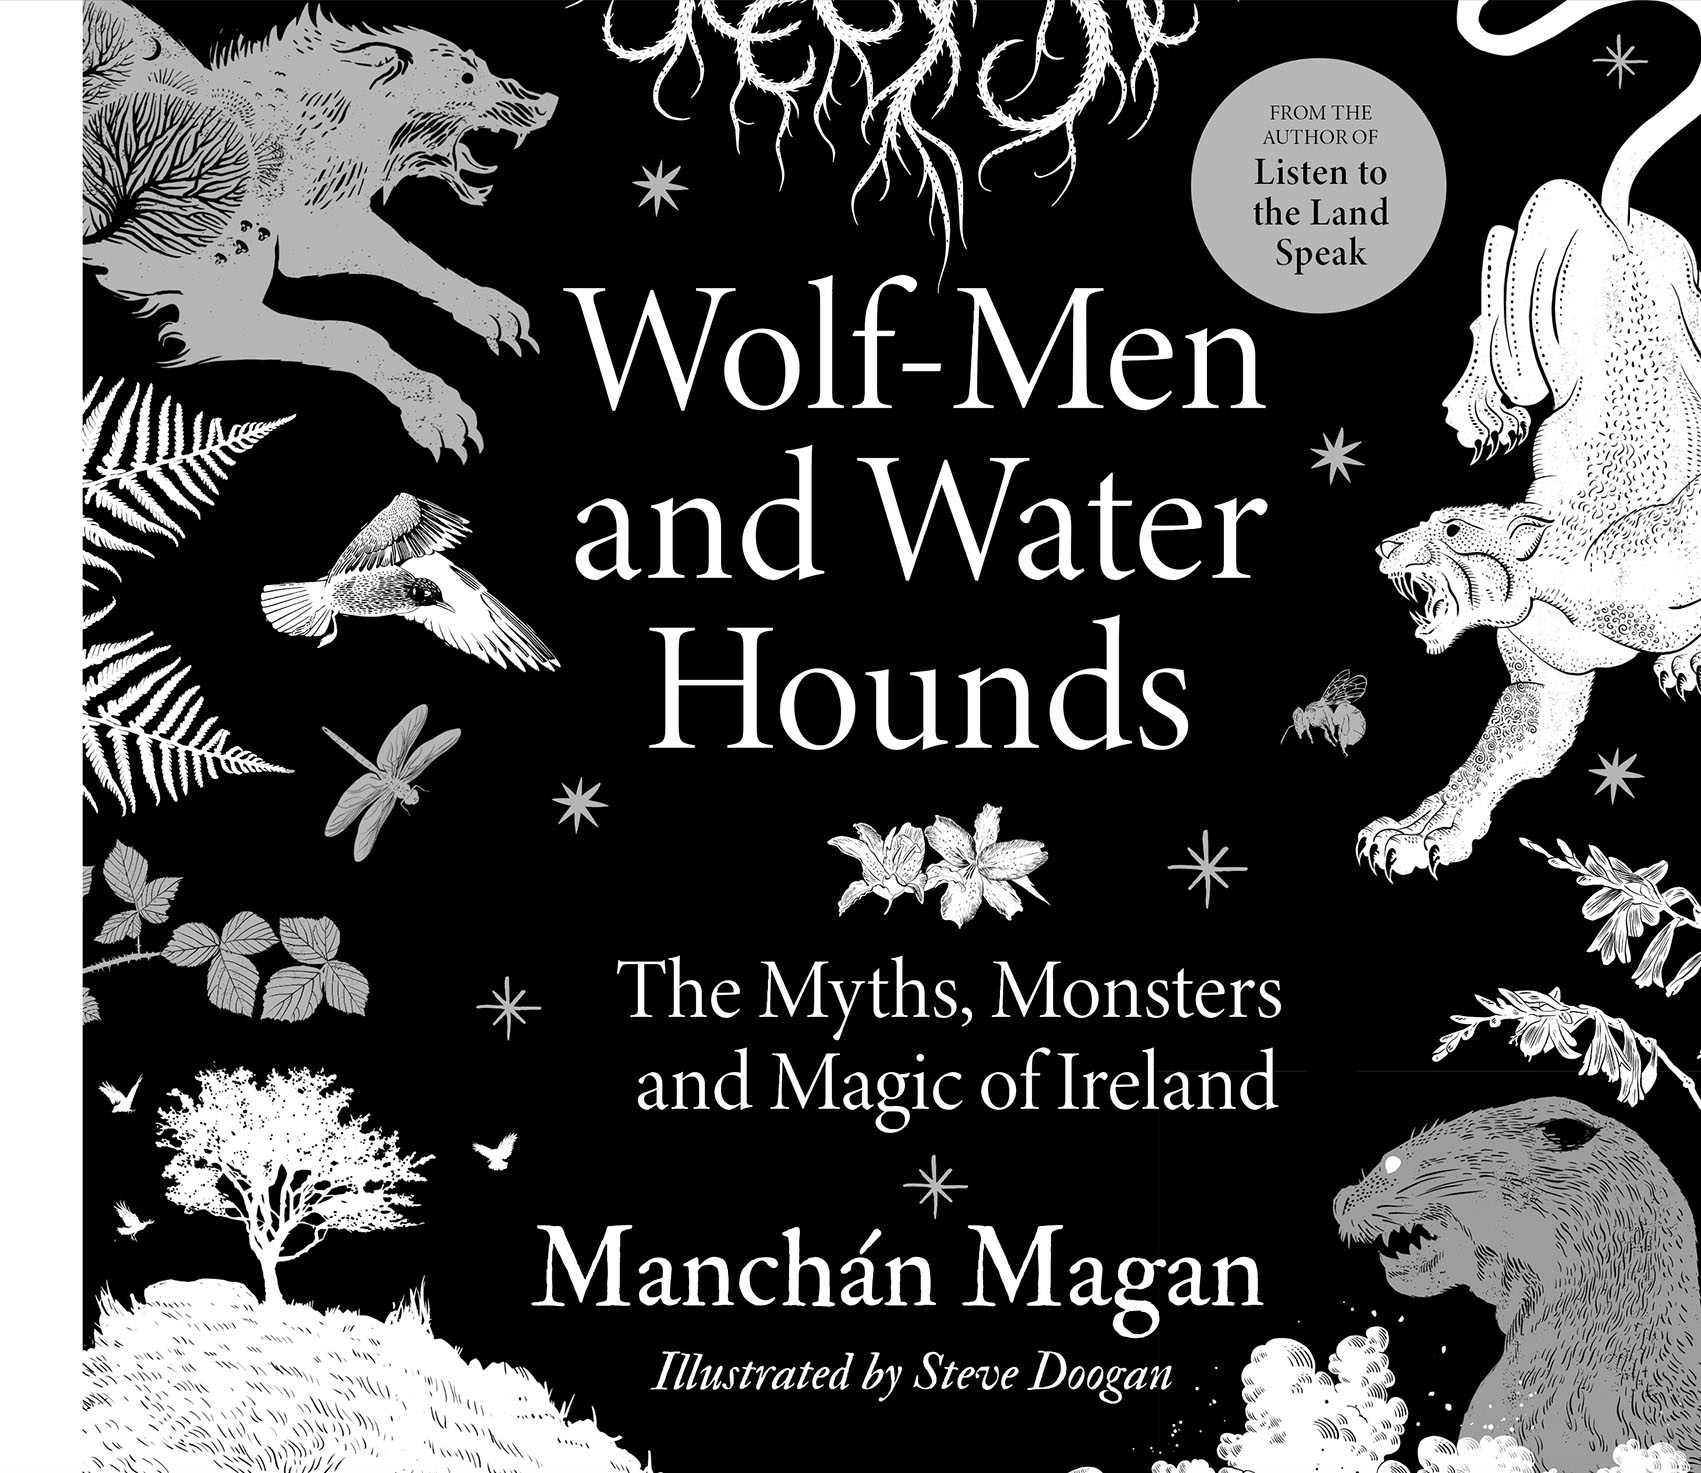 Wolf-Men and Water Hounds: The Myths, Monsters and Magic of Ireland by Manchán Magan